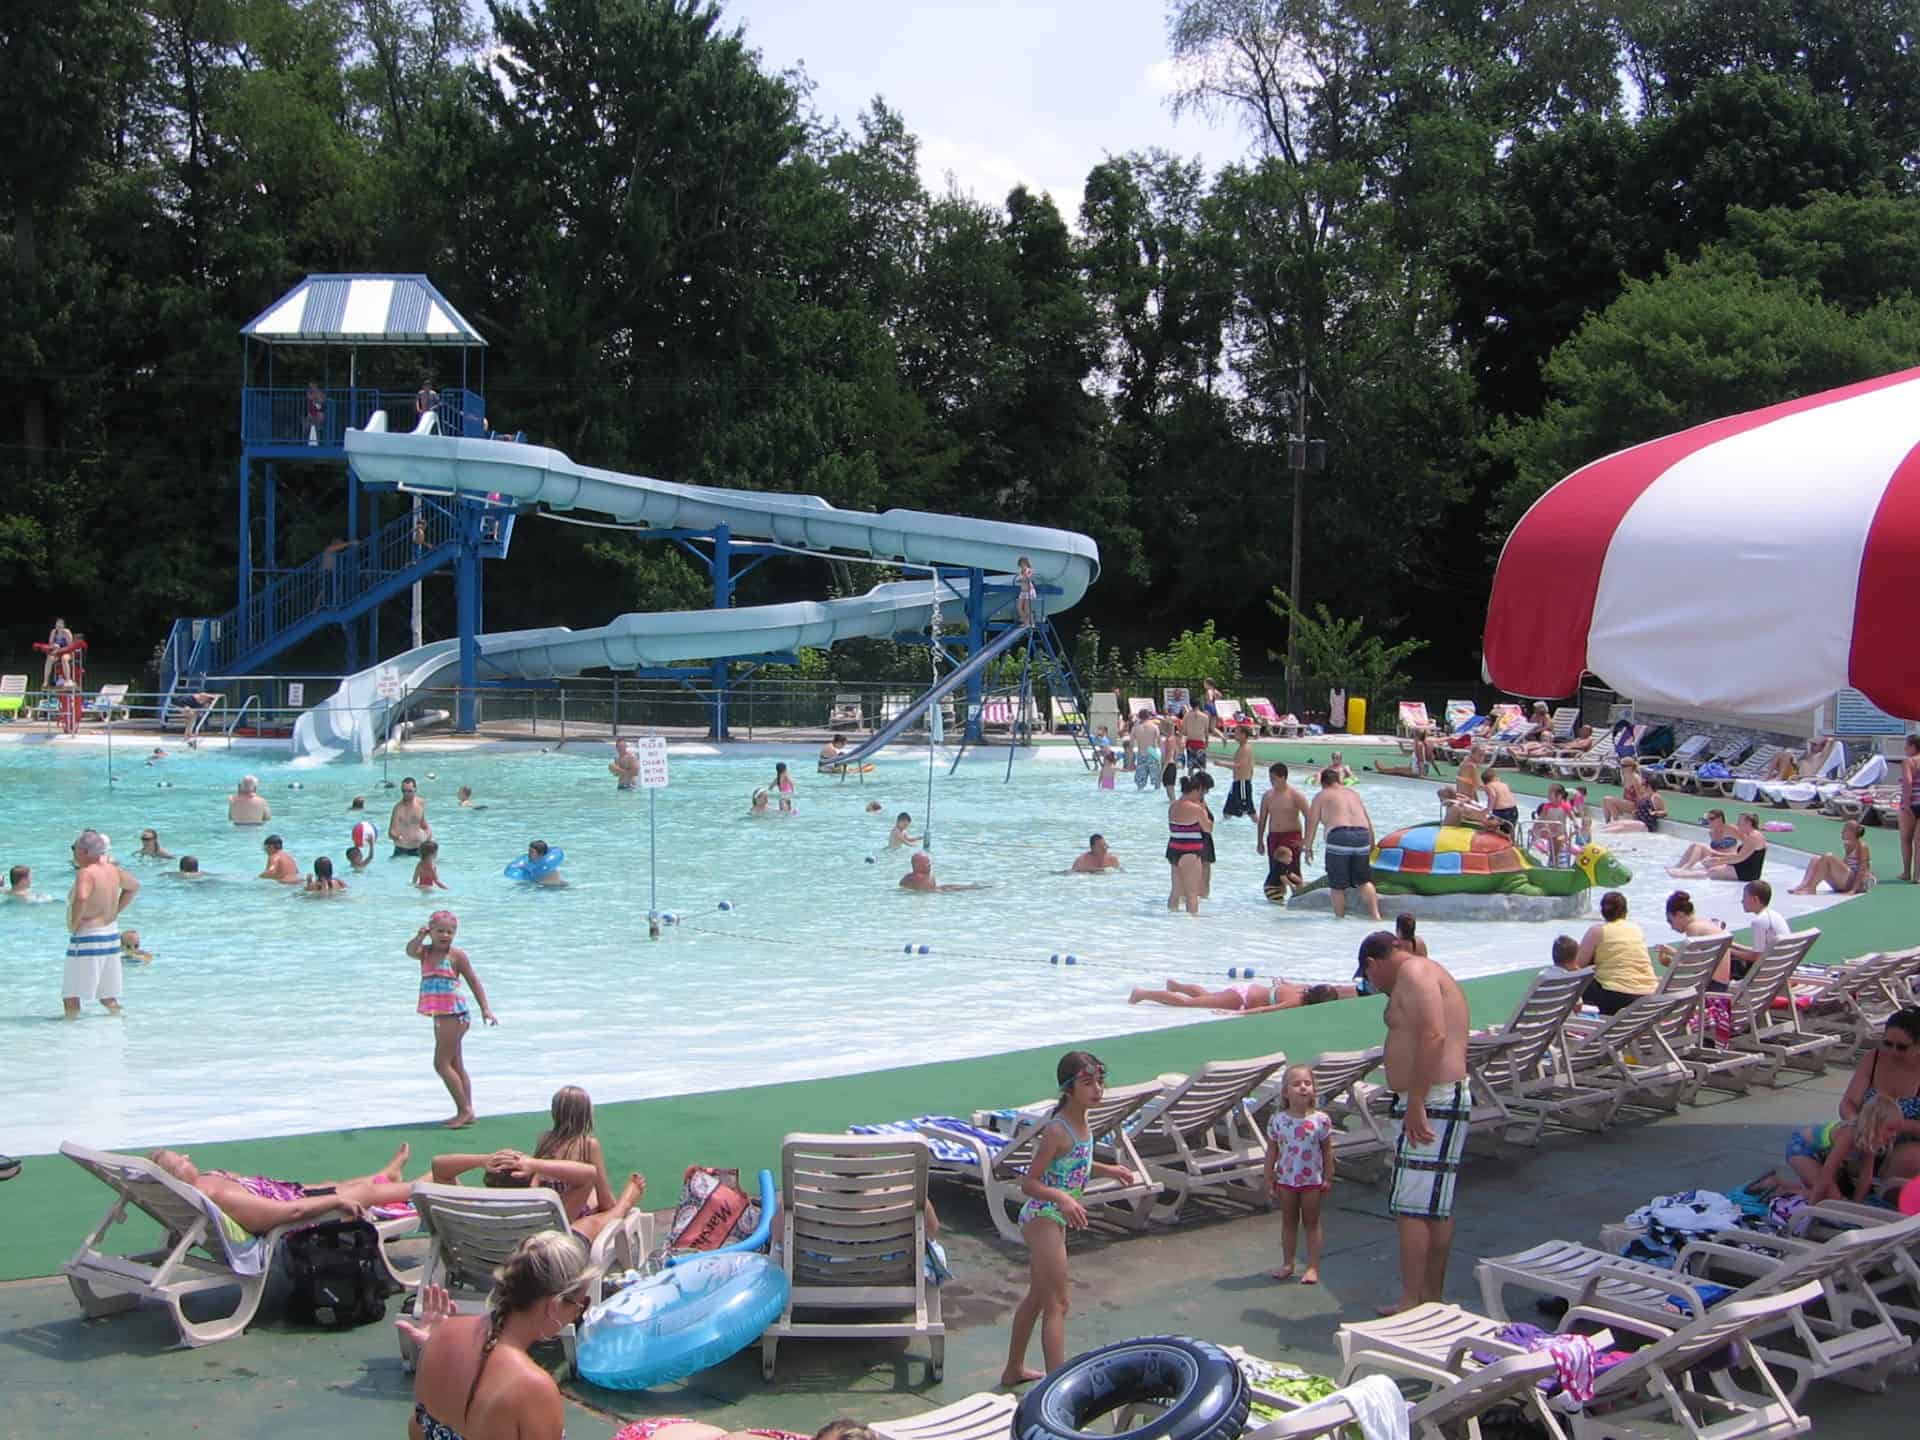 A group of people at a water park.